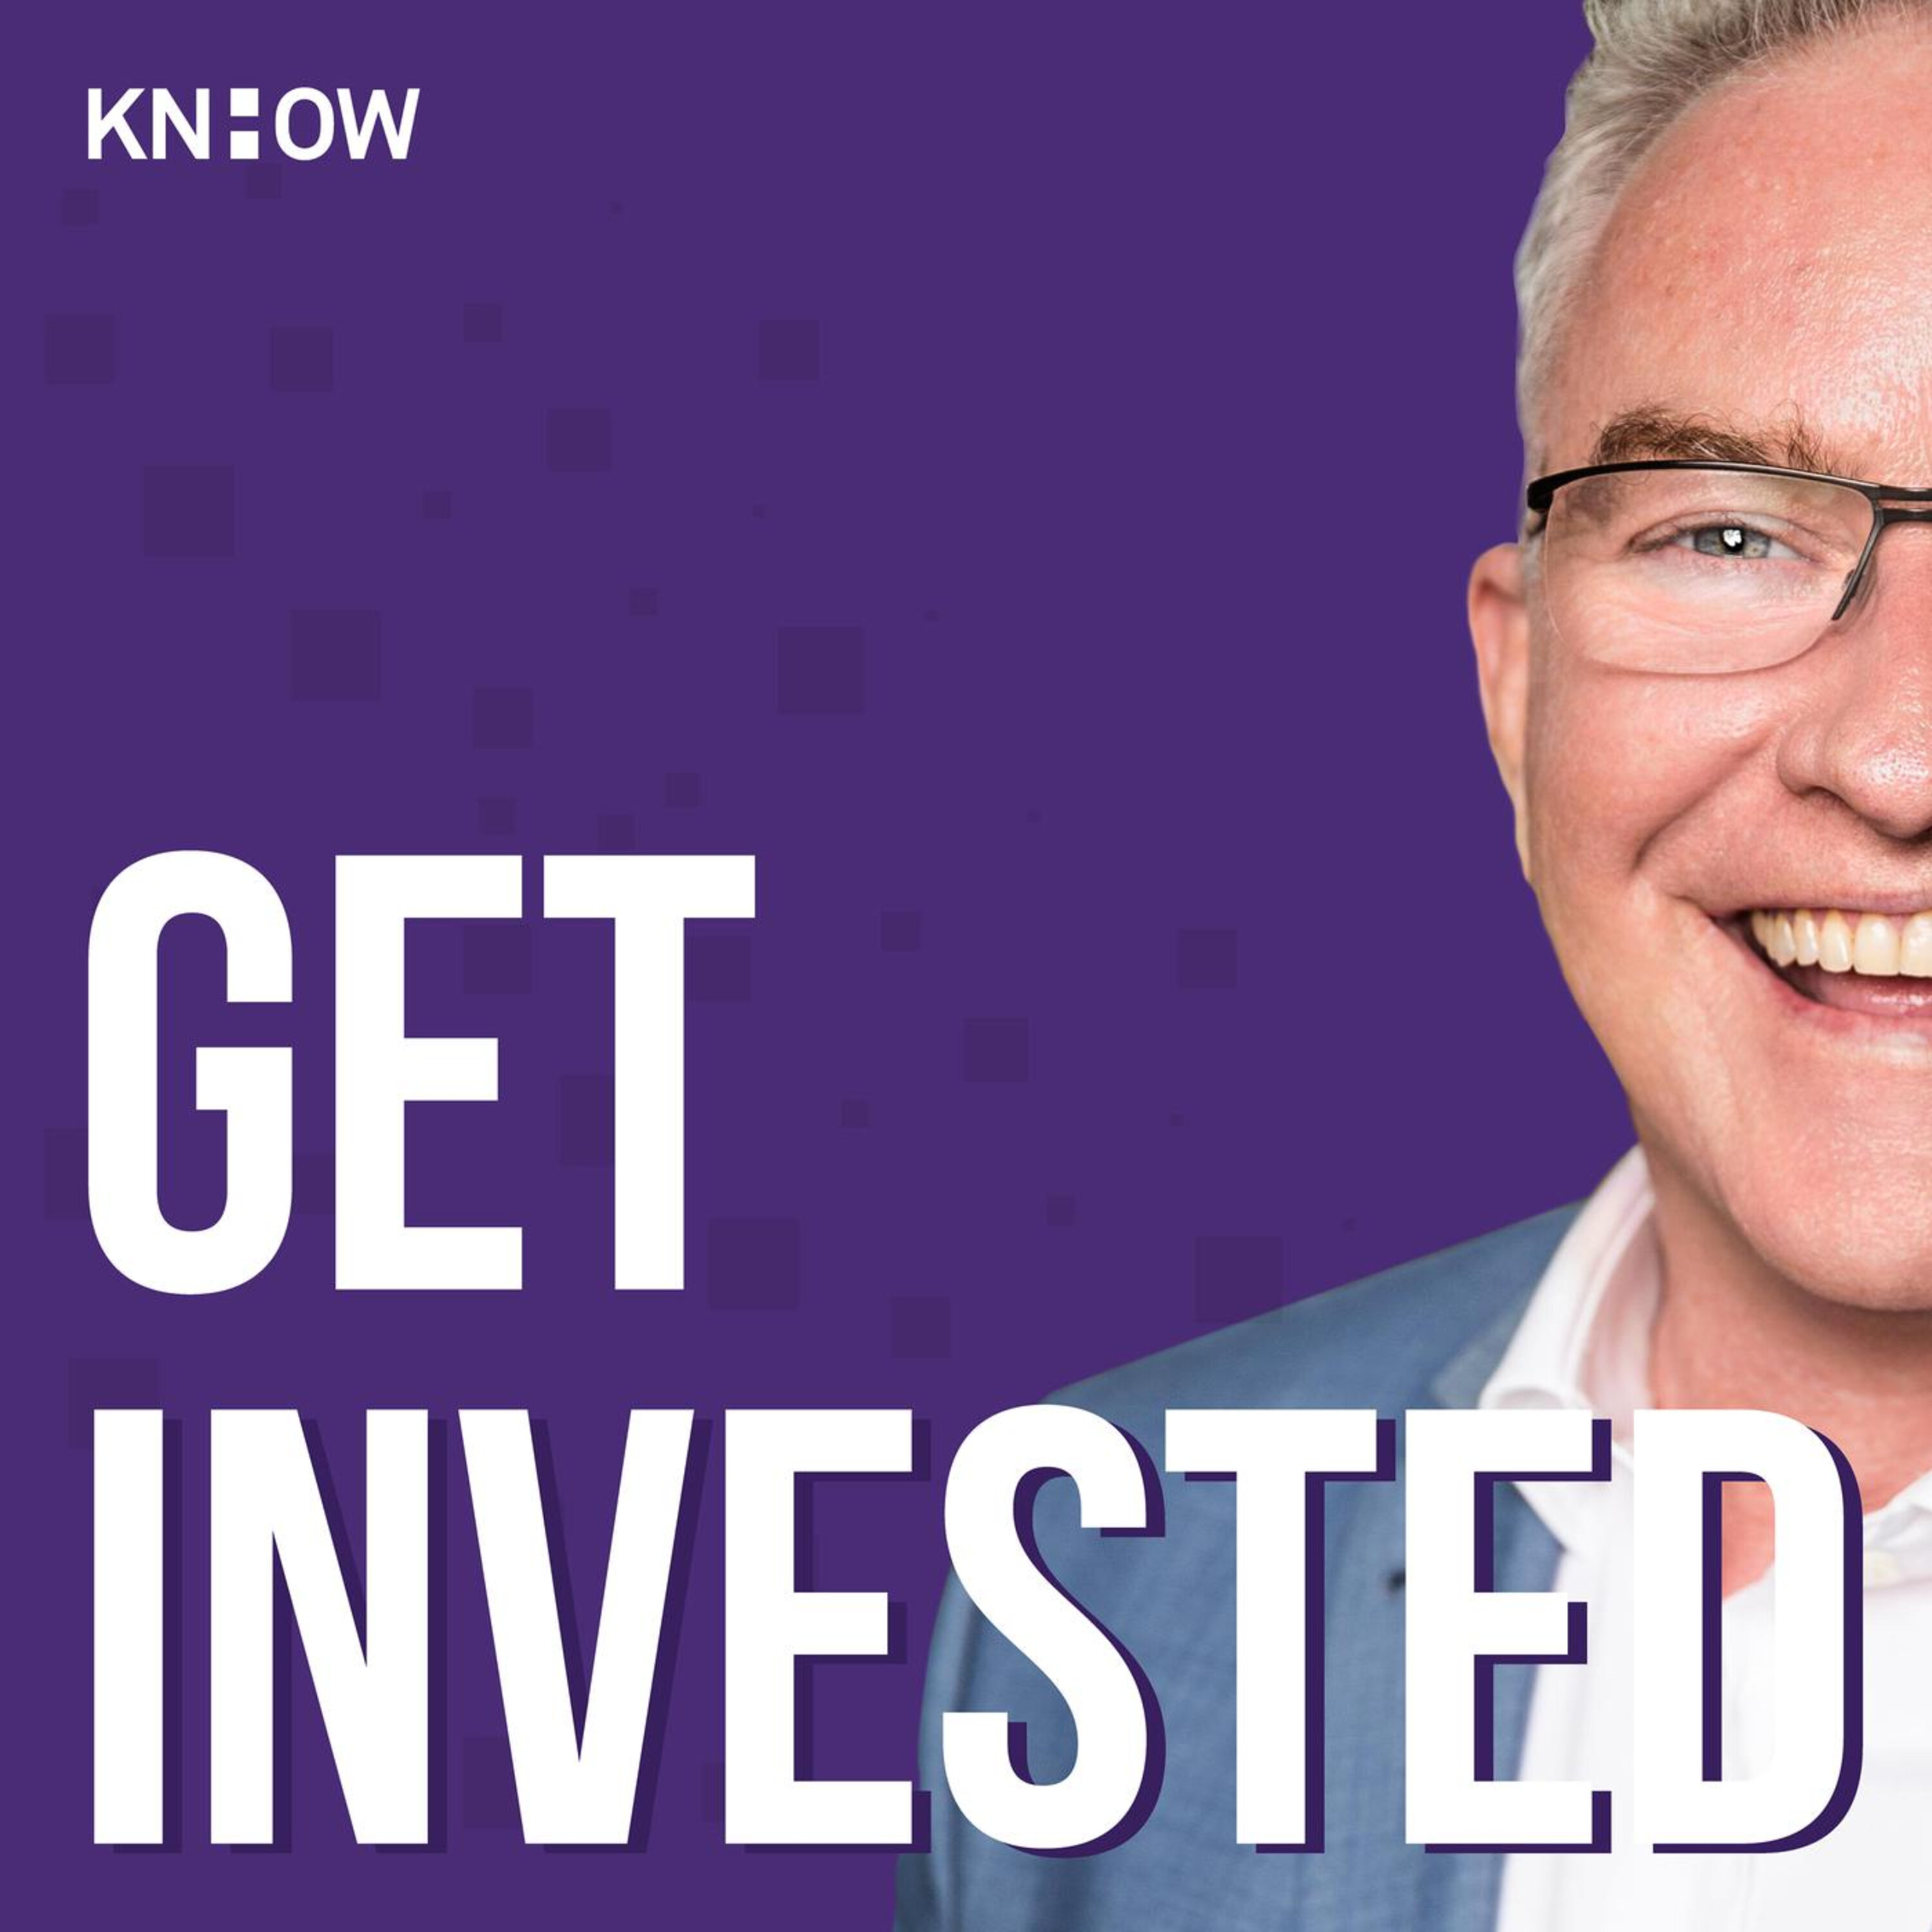 Get Invested: Part 2 - Steve McKnight on becoming a money magnet